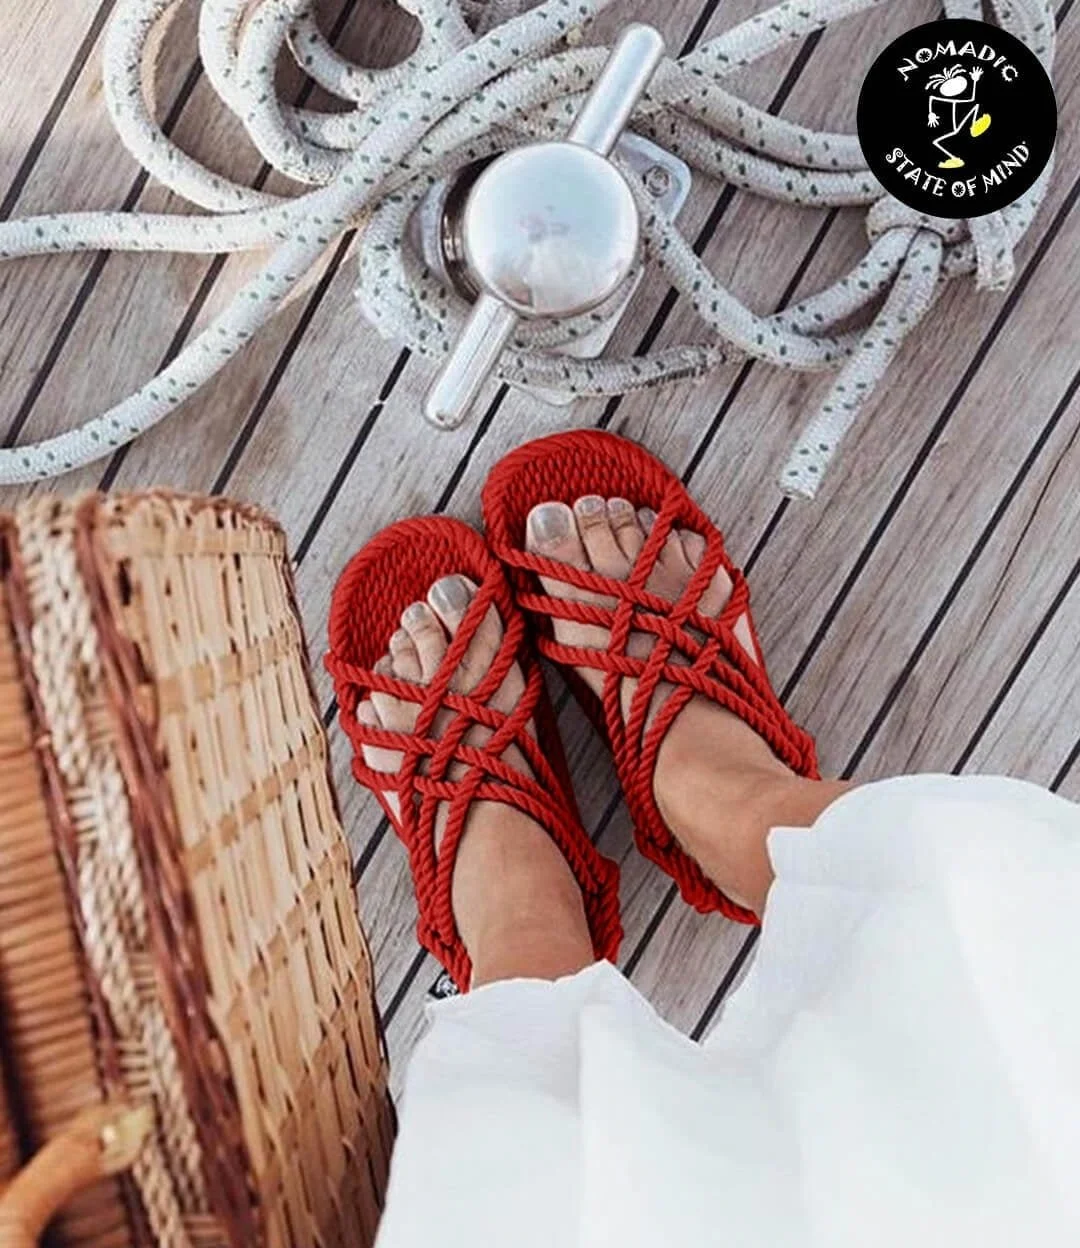 JC Red Sandals by Nomadic State of Mind 